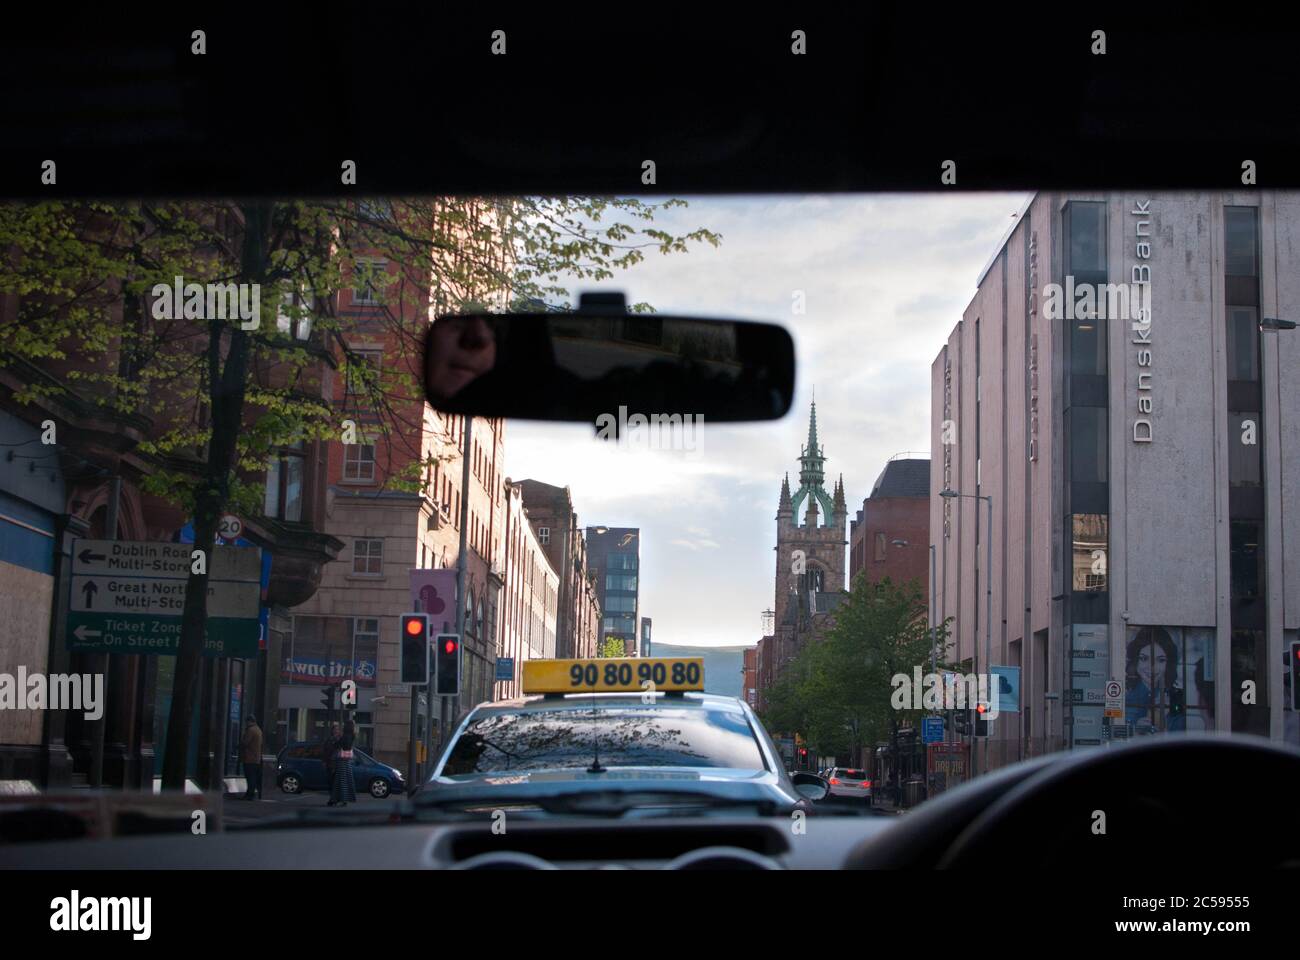 The view of a taxi on the street from inside a car Stock Photo